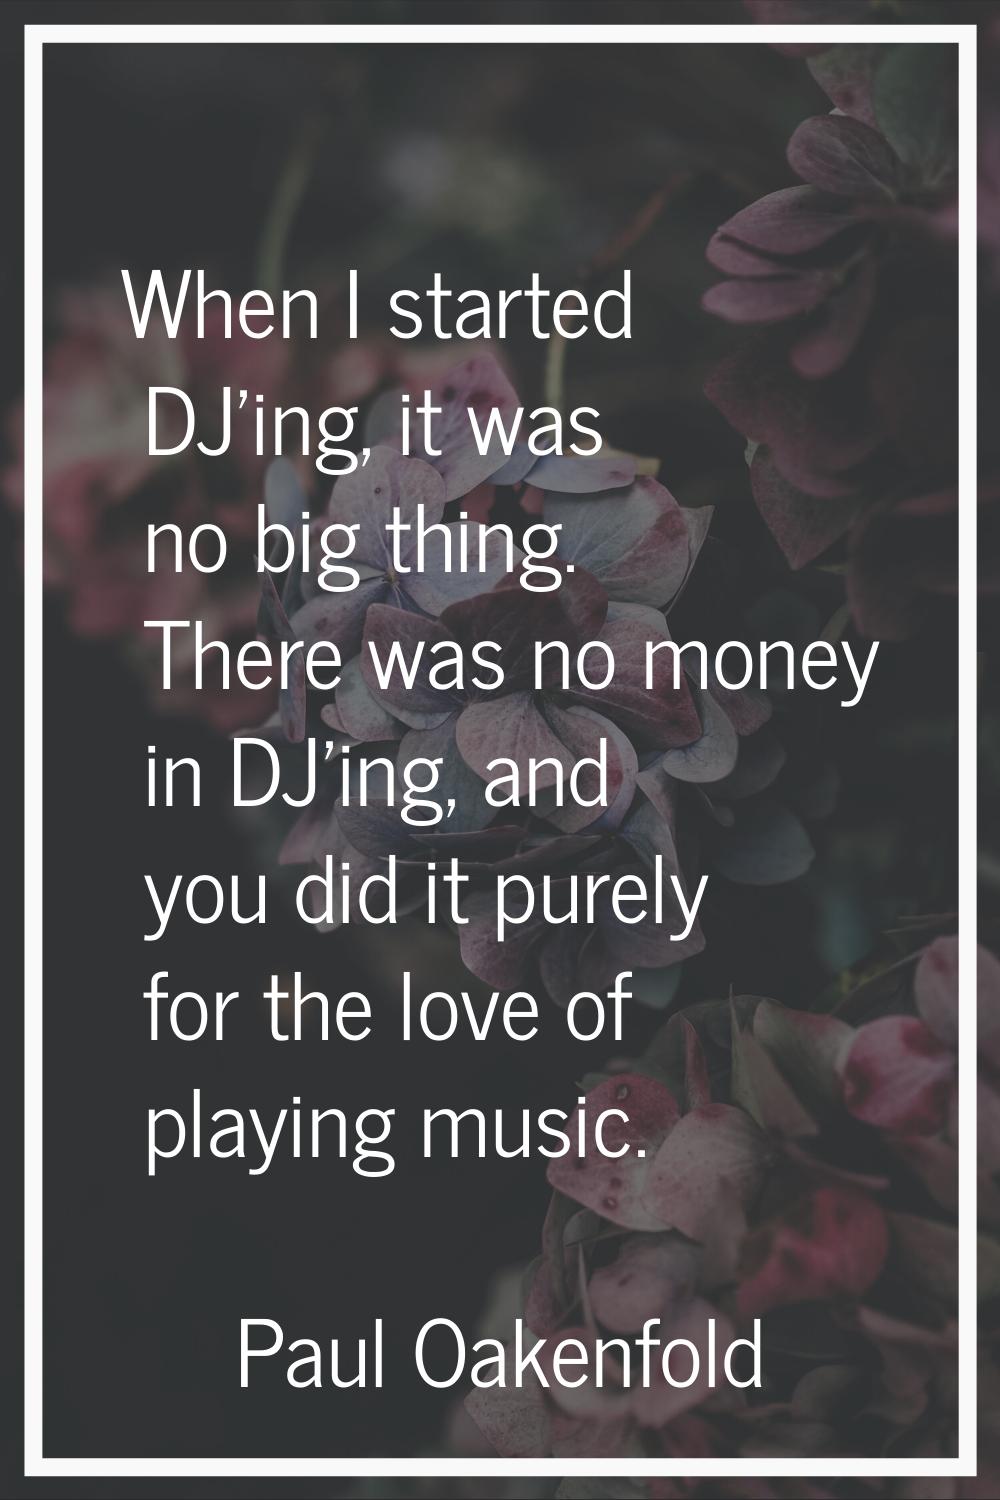 When I started DJ'ing, it was no big thing. There was no money in DJ'ing, and you did it purely for